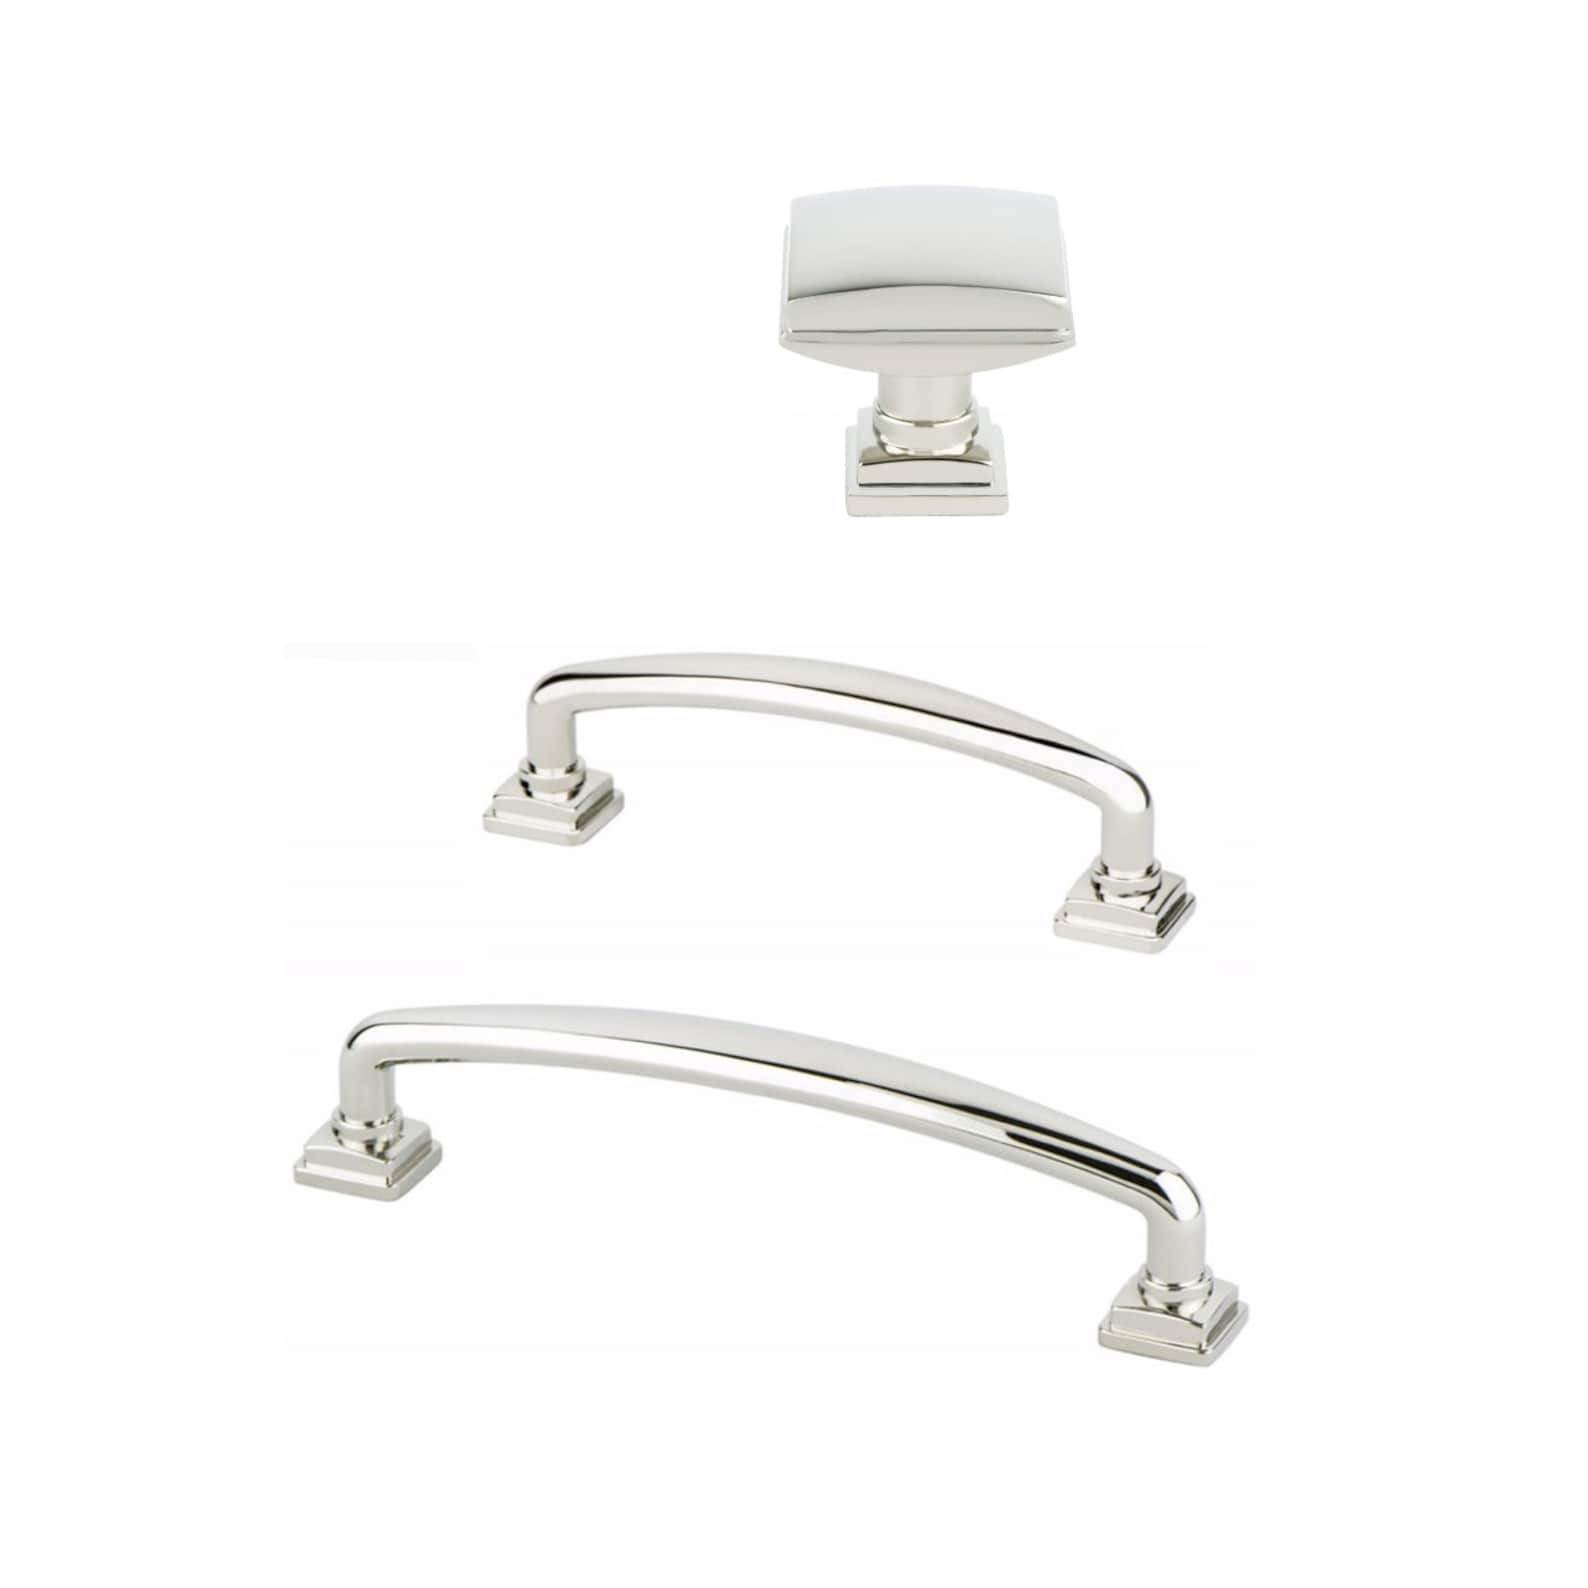 Kelly No.2 Cabinet Knob and Drawer Pulls in Polished Nickel - Forge Hardware Studio